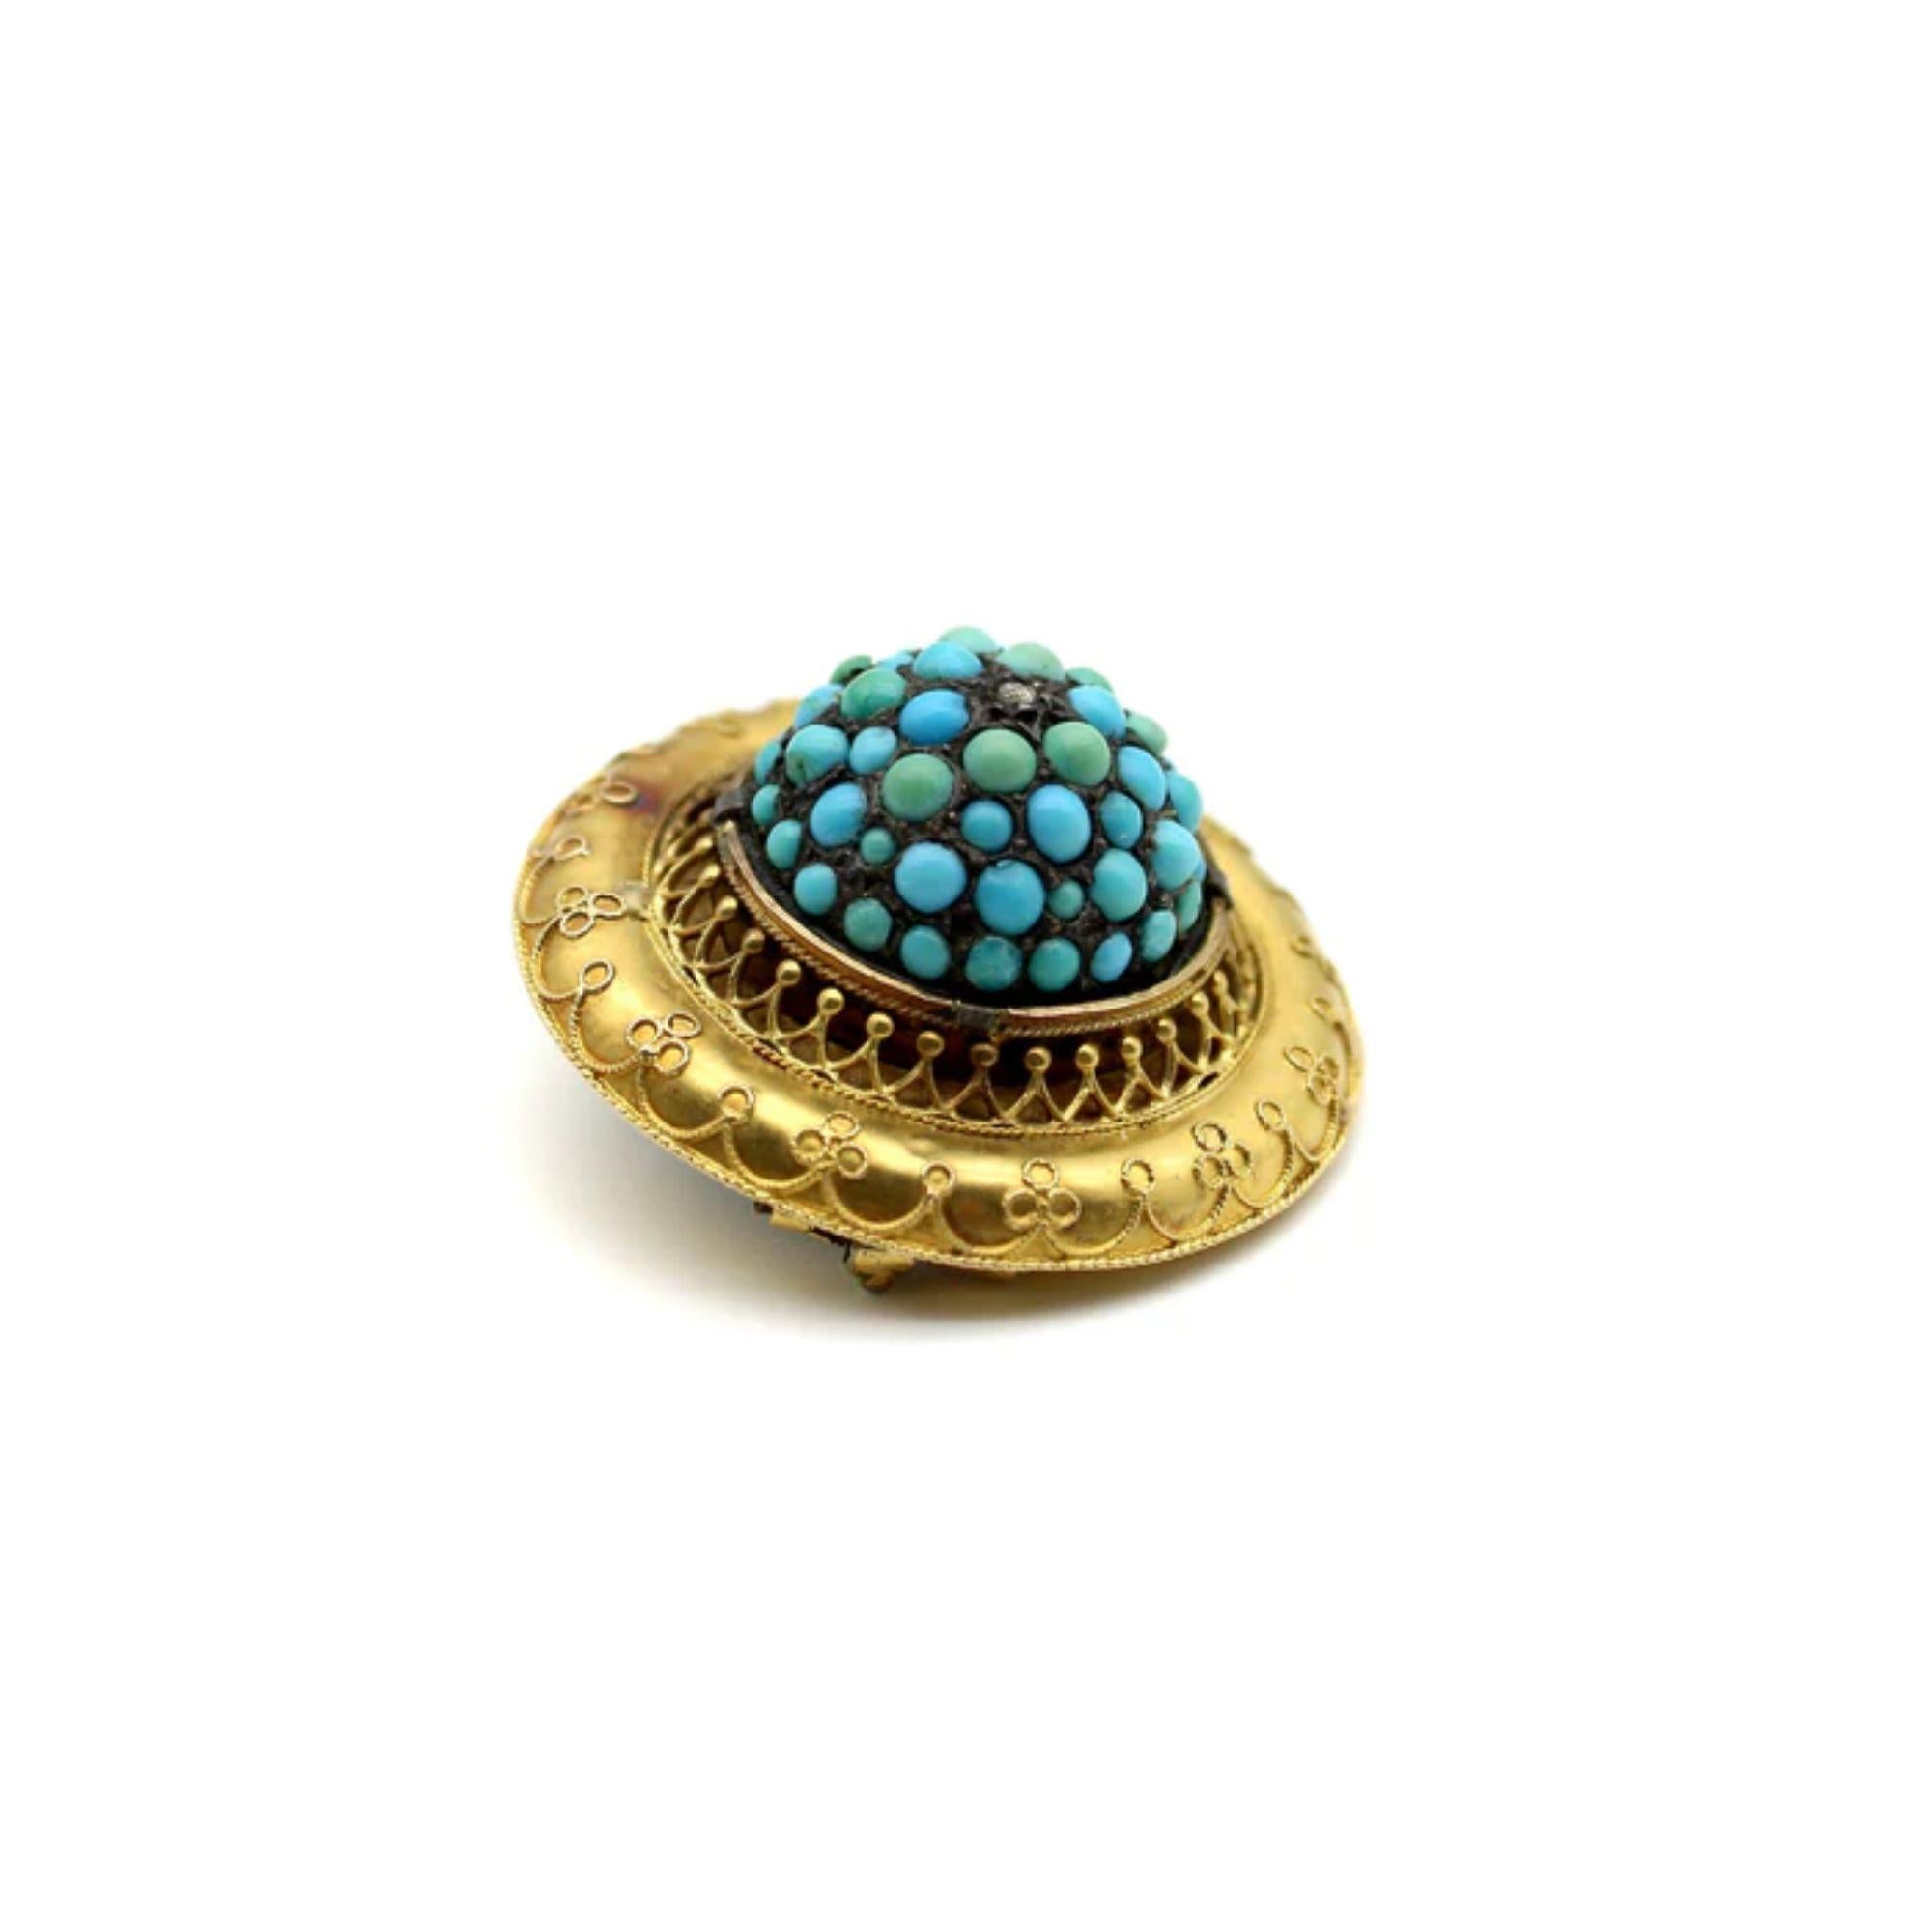 This is a gorgeous 14k gold, turquoise, and diamond brooch, made in the Etruscan Revival style of the 1870's. It has a three dimensional dome at its center, which is covered in turquoise cabochons of different sizes and shades, and accented at the